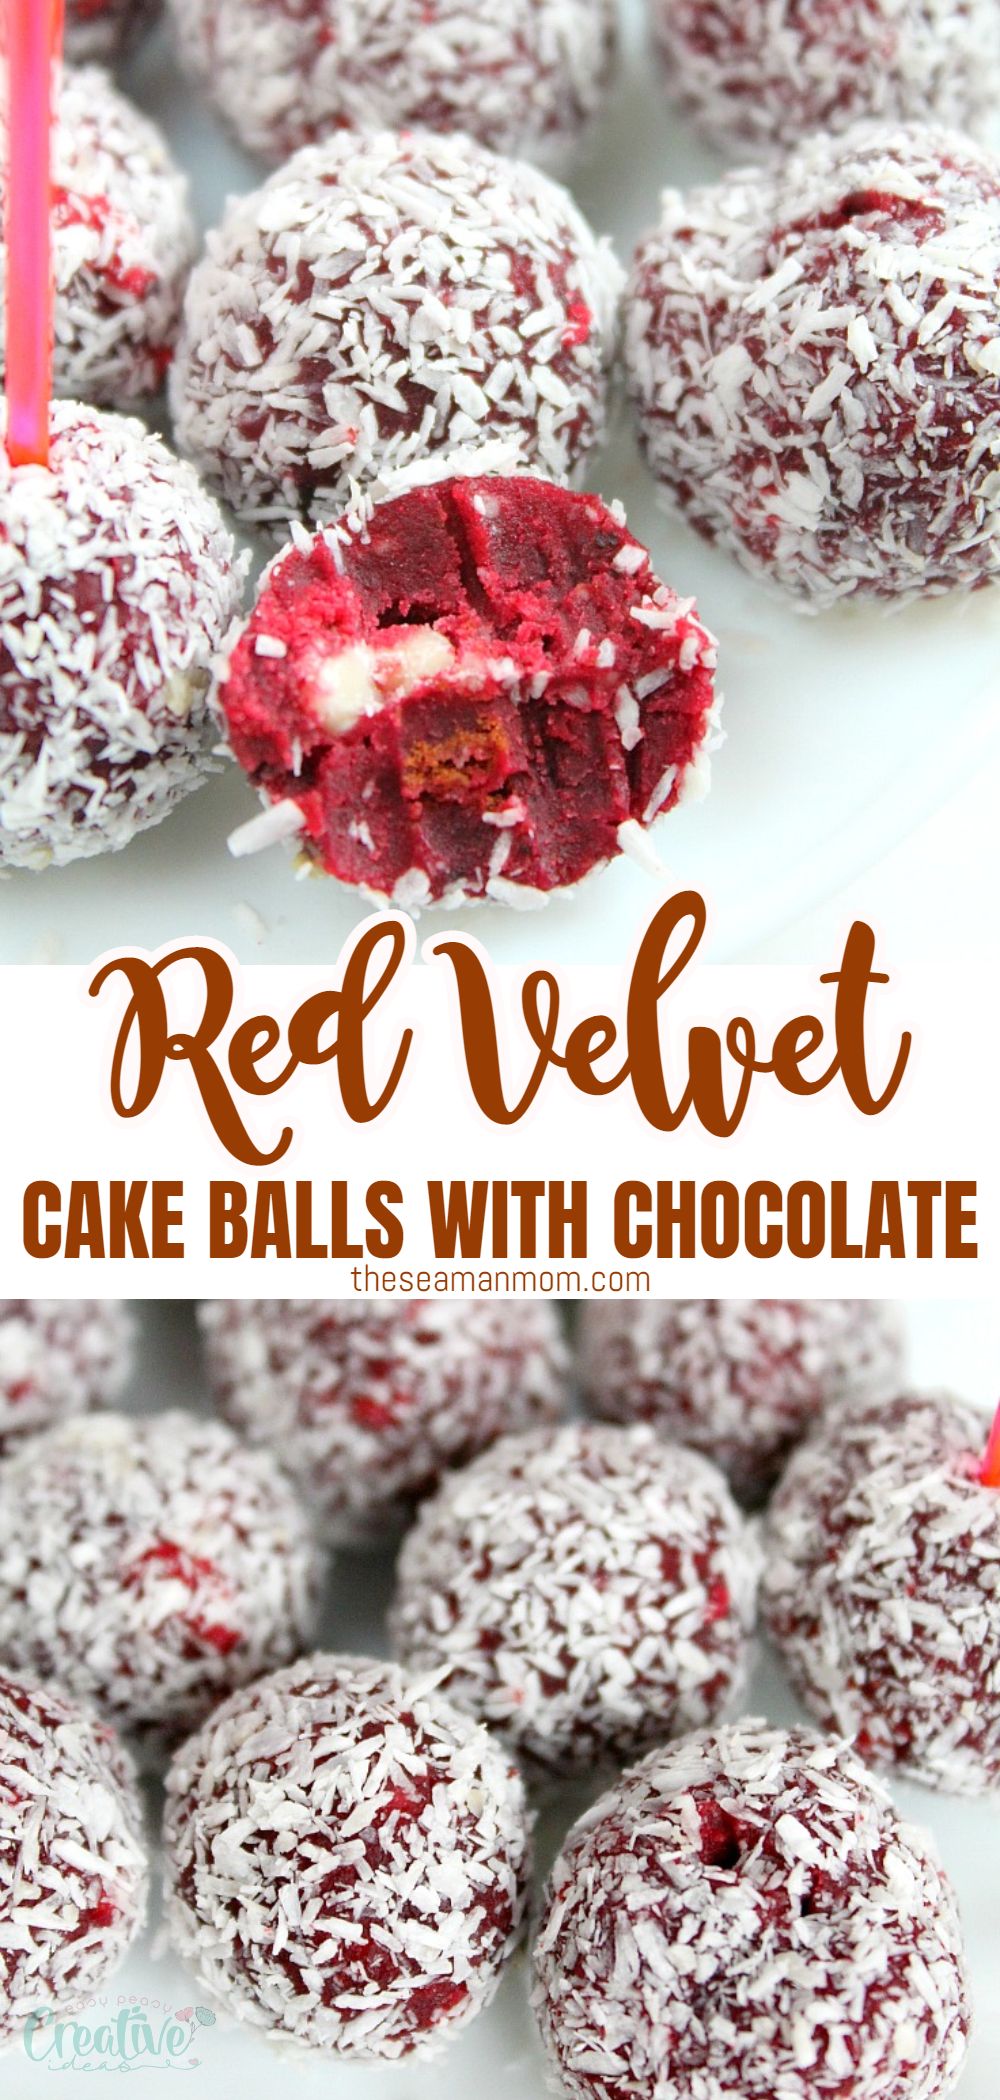 These moist red velvet cake balls with coconut and white chocolate bits are festive, sweet and make a wonderful indulgent treat or gift! This recipe is perfect not only for Valentines but any holiday! via @petroneagu